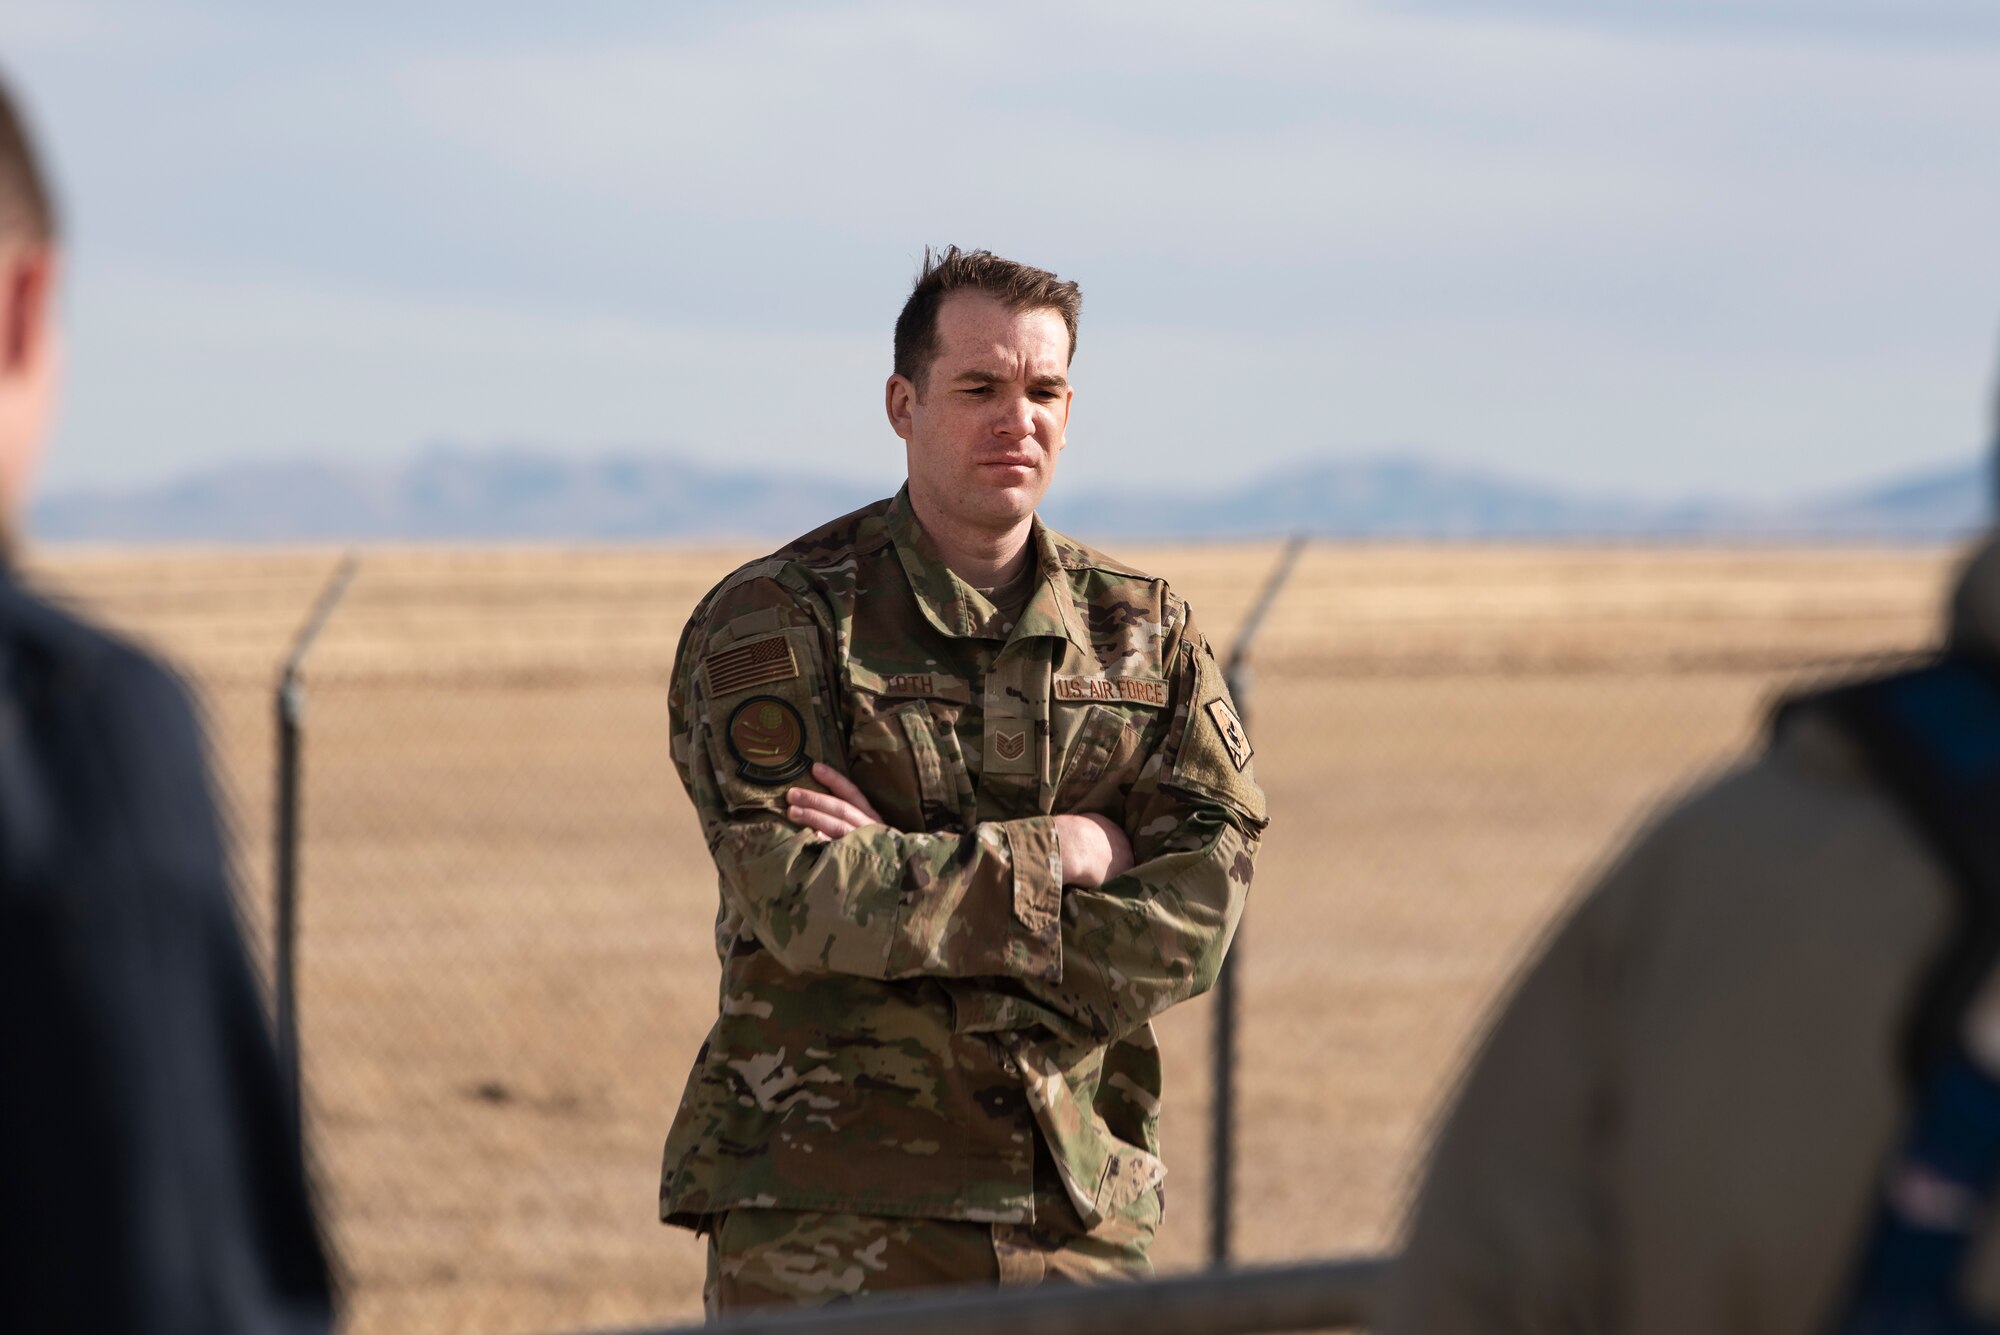 Tech. Sgt. Louis Toth, 373rd Training Squadron Det. 22 electromechanical team instructor, looks on as maintainers conduct training March 19, 2021, at a launch facility near Malmstrom Air Force Base, Mont.